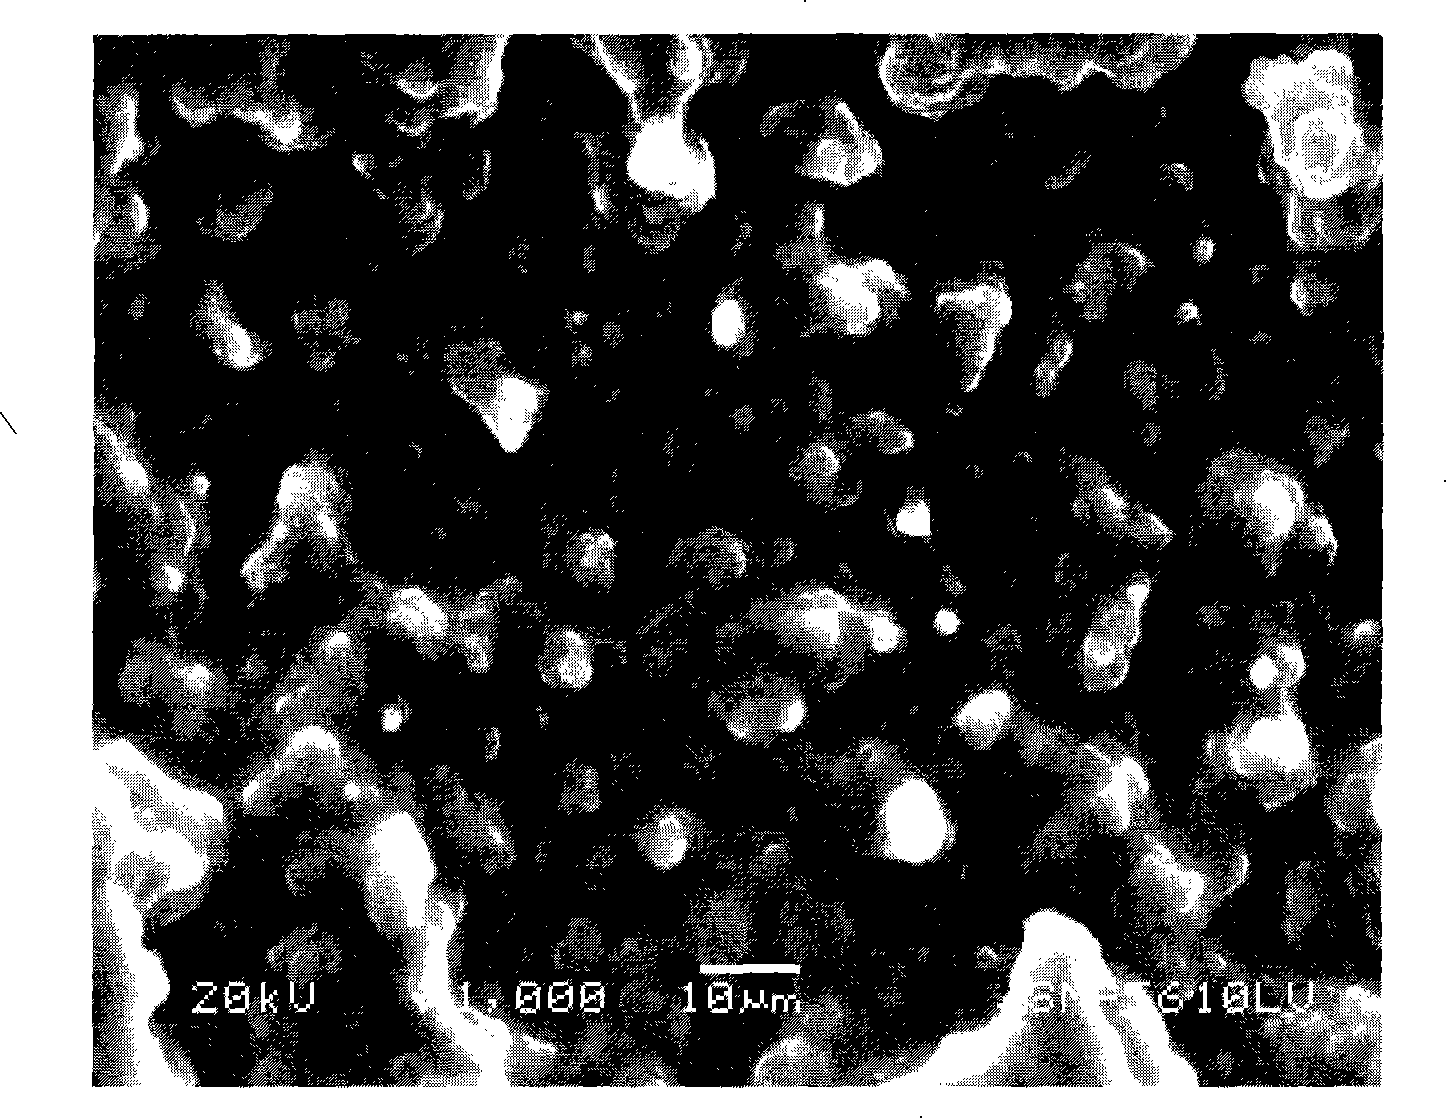 Method for improving thermoplastic plastics shaping manufacturability and capability